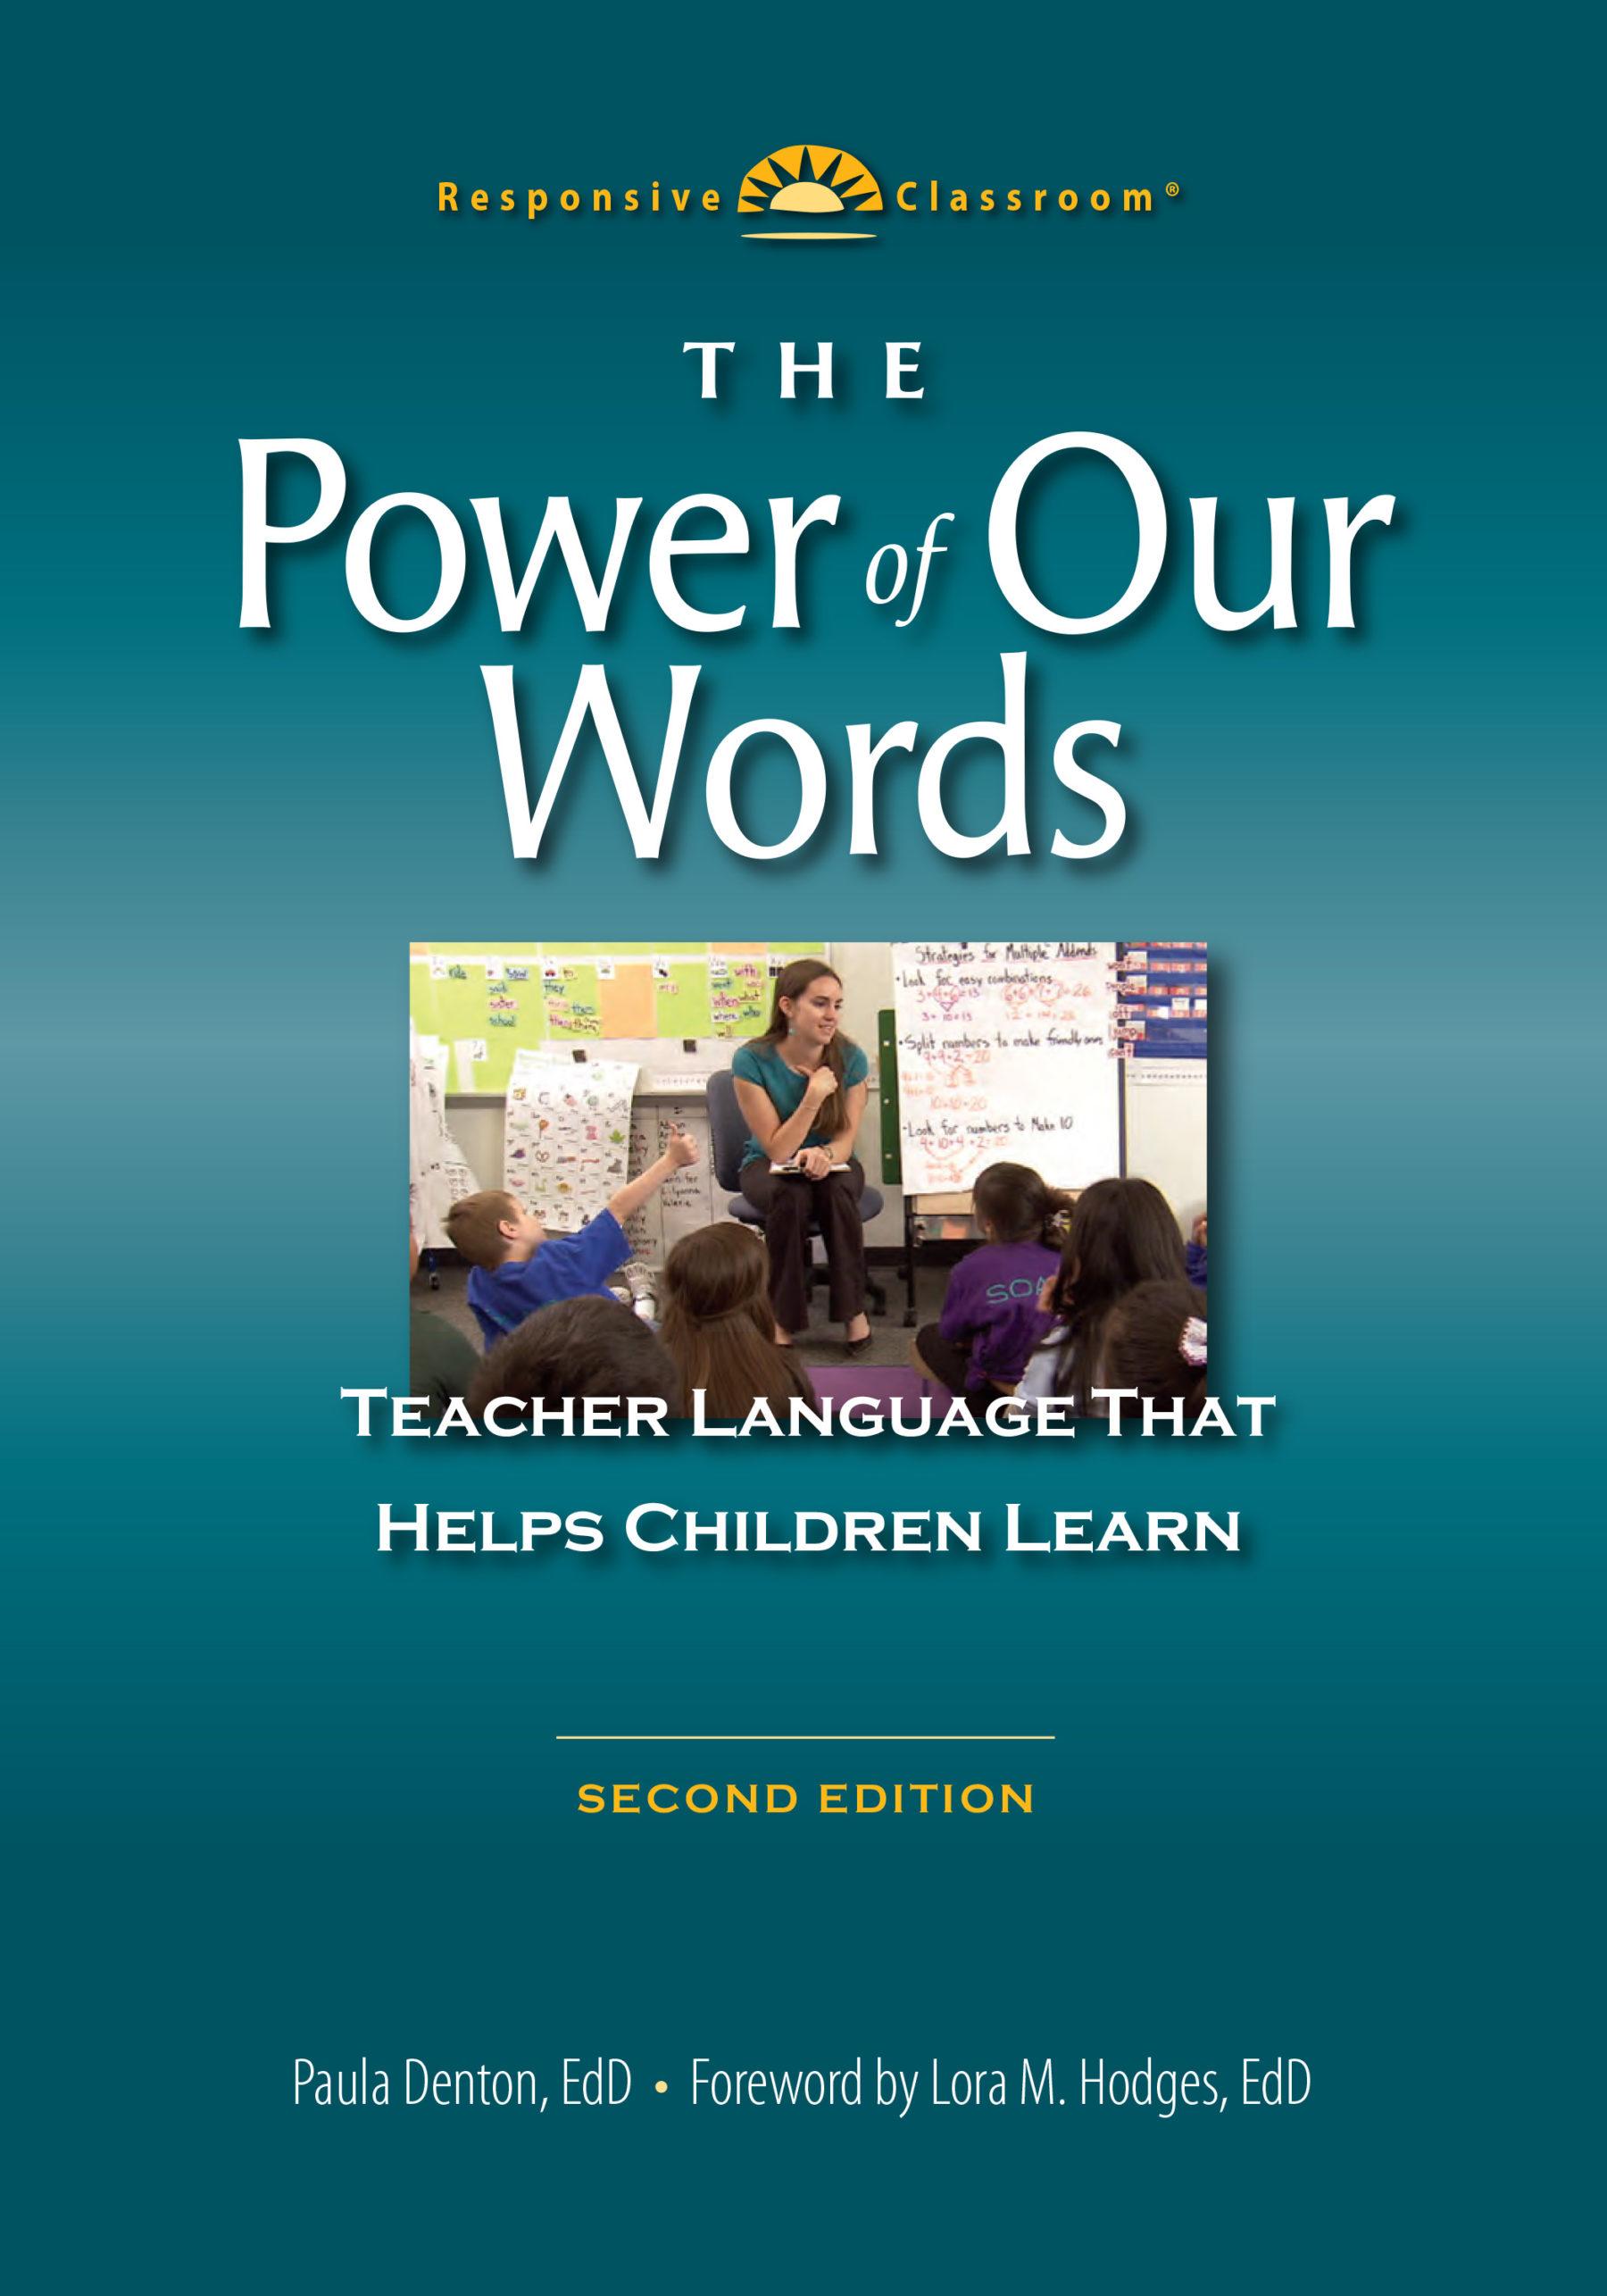 The Power of Our Words by Paula Denton